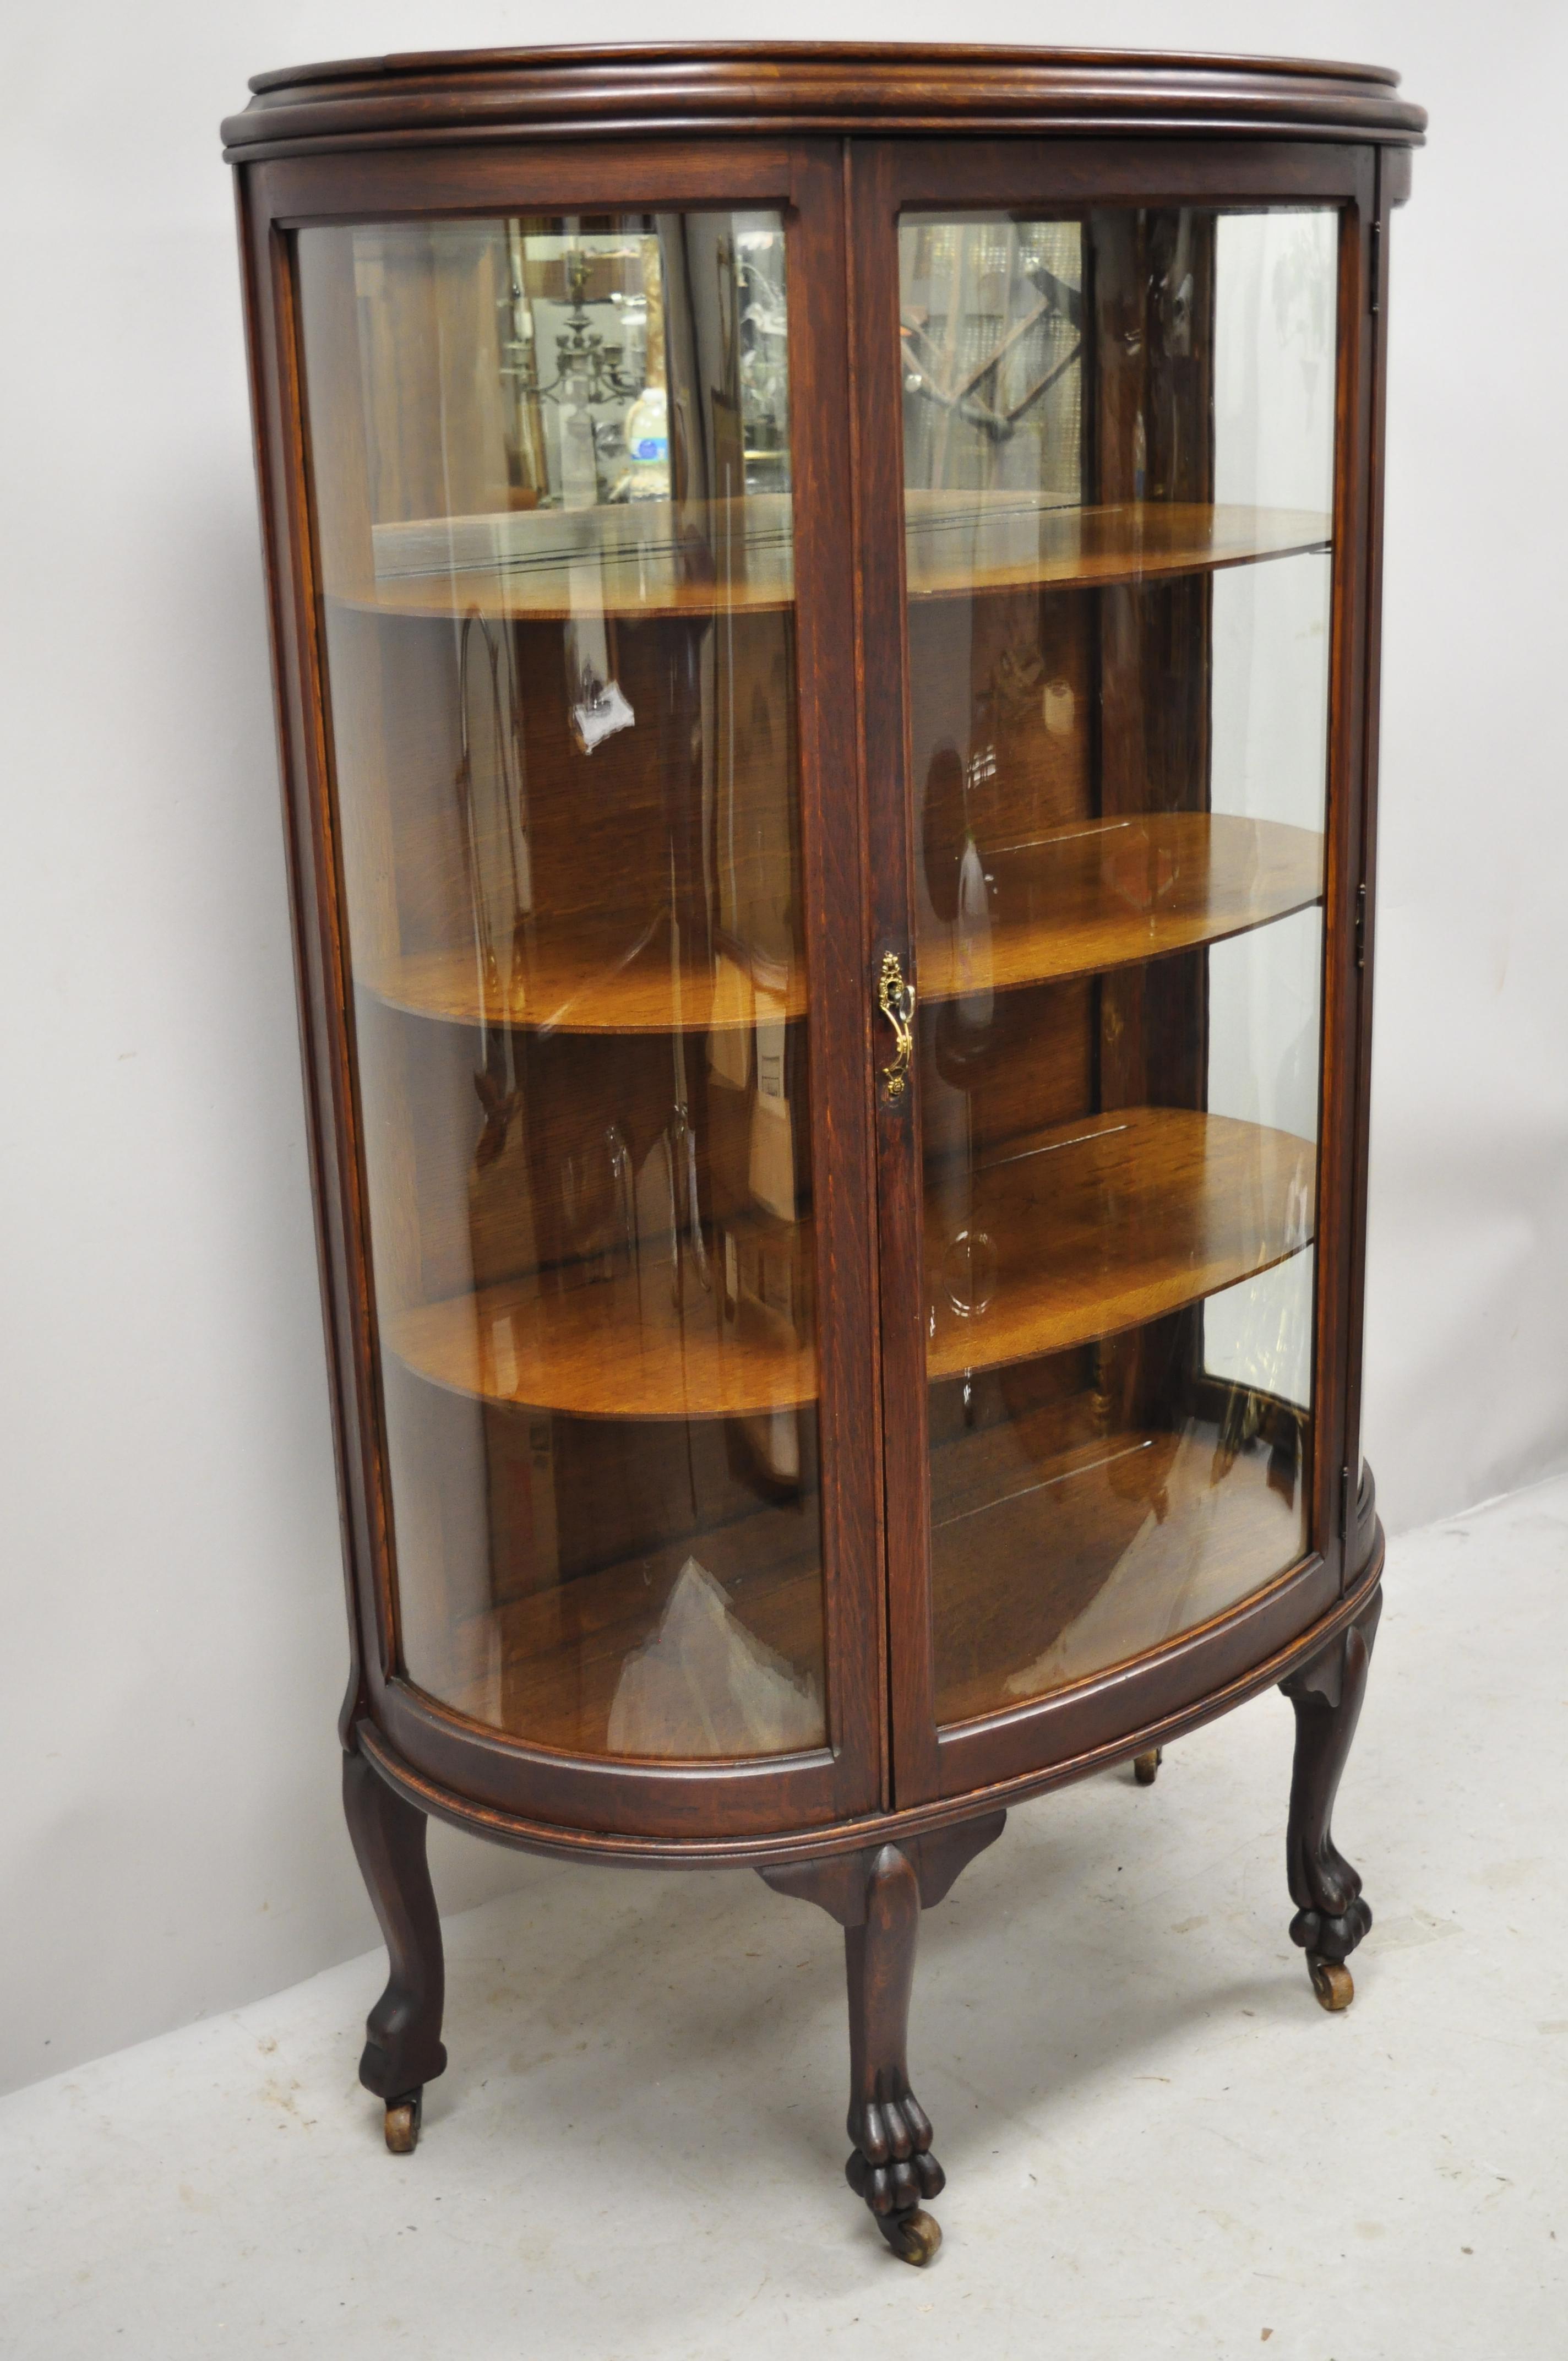 Antique American Empire bow glass oak paw feet mirror back China cabinet curio. Item features 3 curved/bowed glass panes, paw feet, rolling casters, beautiful wood grain, 3 wooden shelves, very nice antique item, circa early 1900s. Measurements: